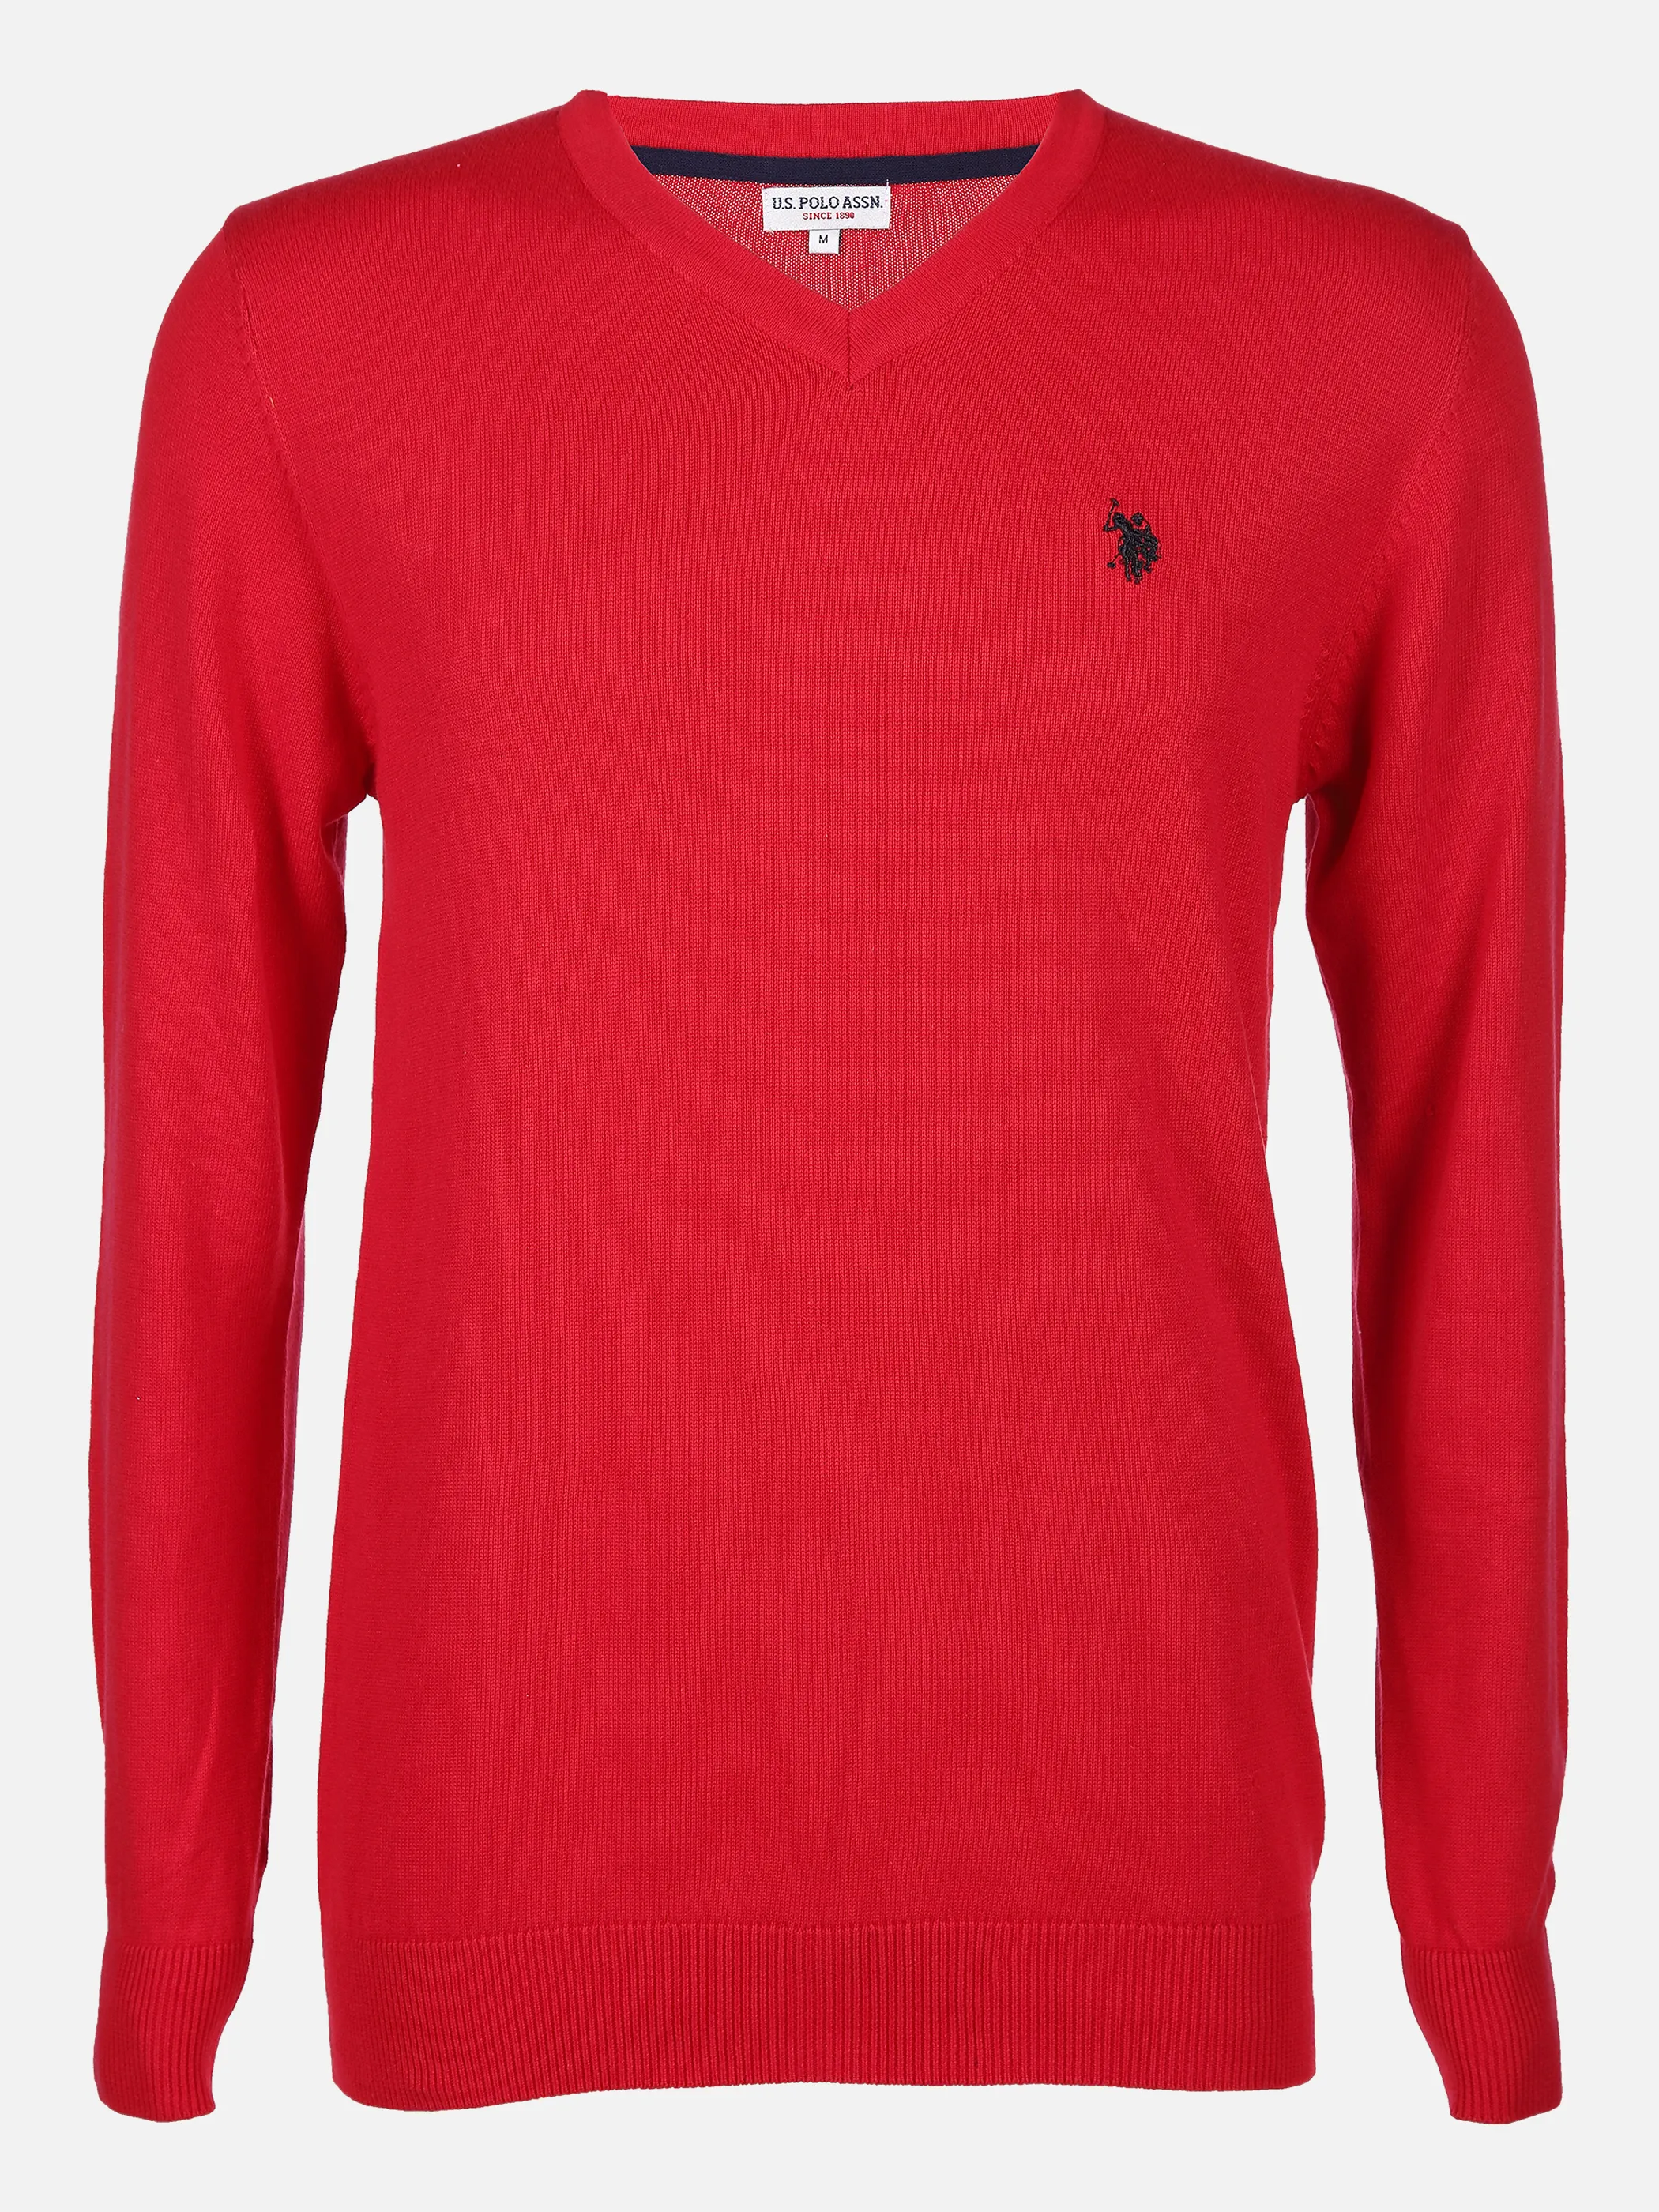 U.S. Polo Assn. He. Pullover U.S. Polo V-Neck Rot 799159 RED 1